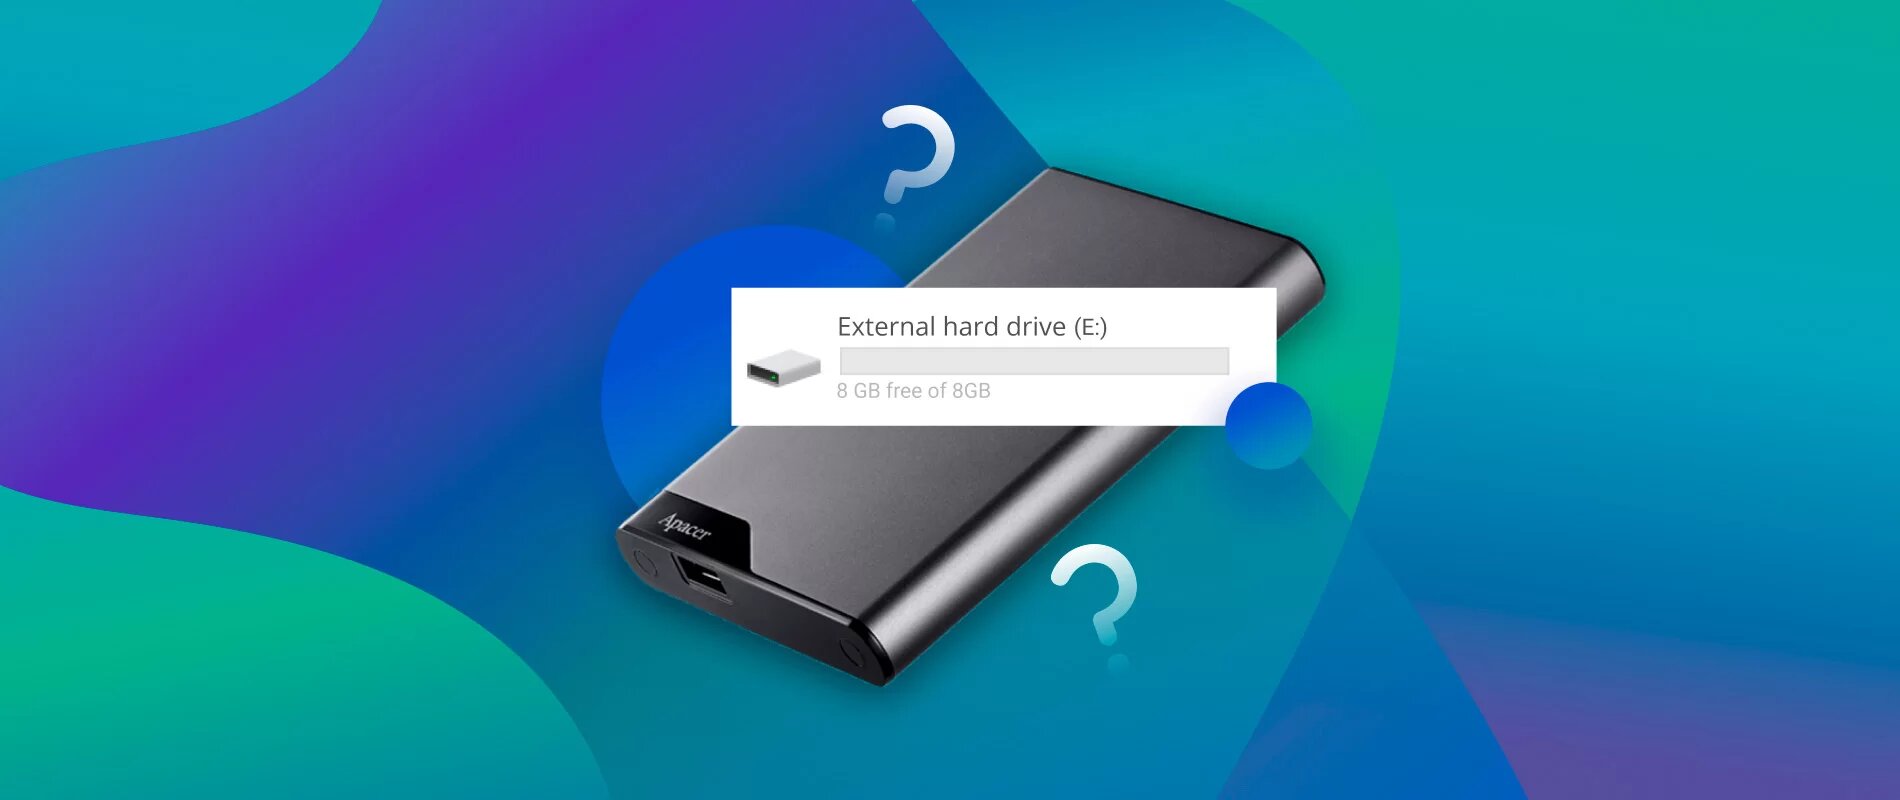 How To Recover Formatted External Hard Drive